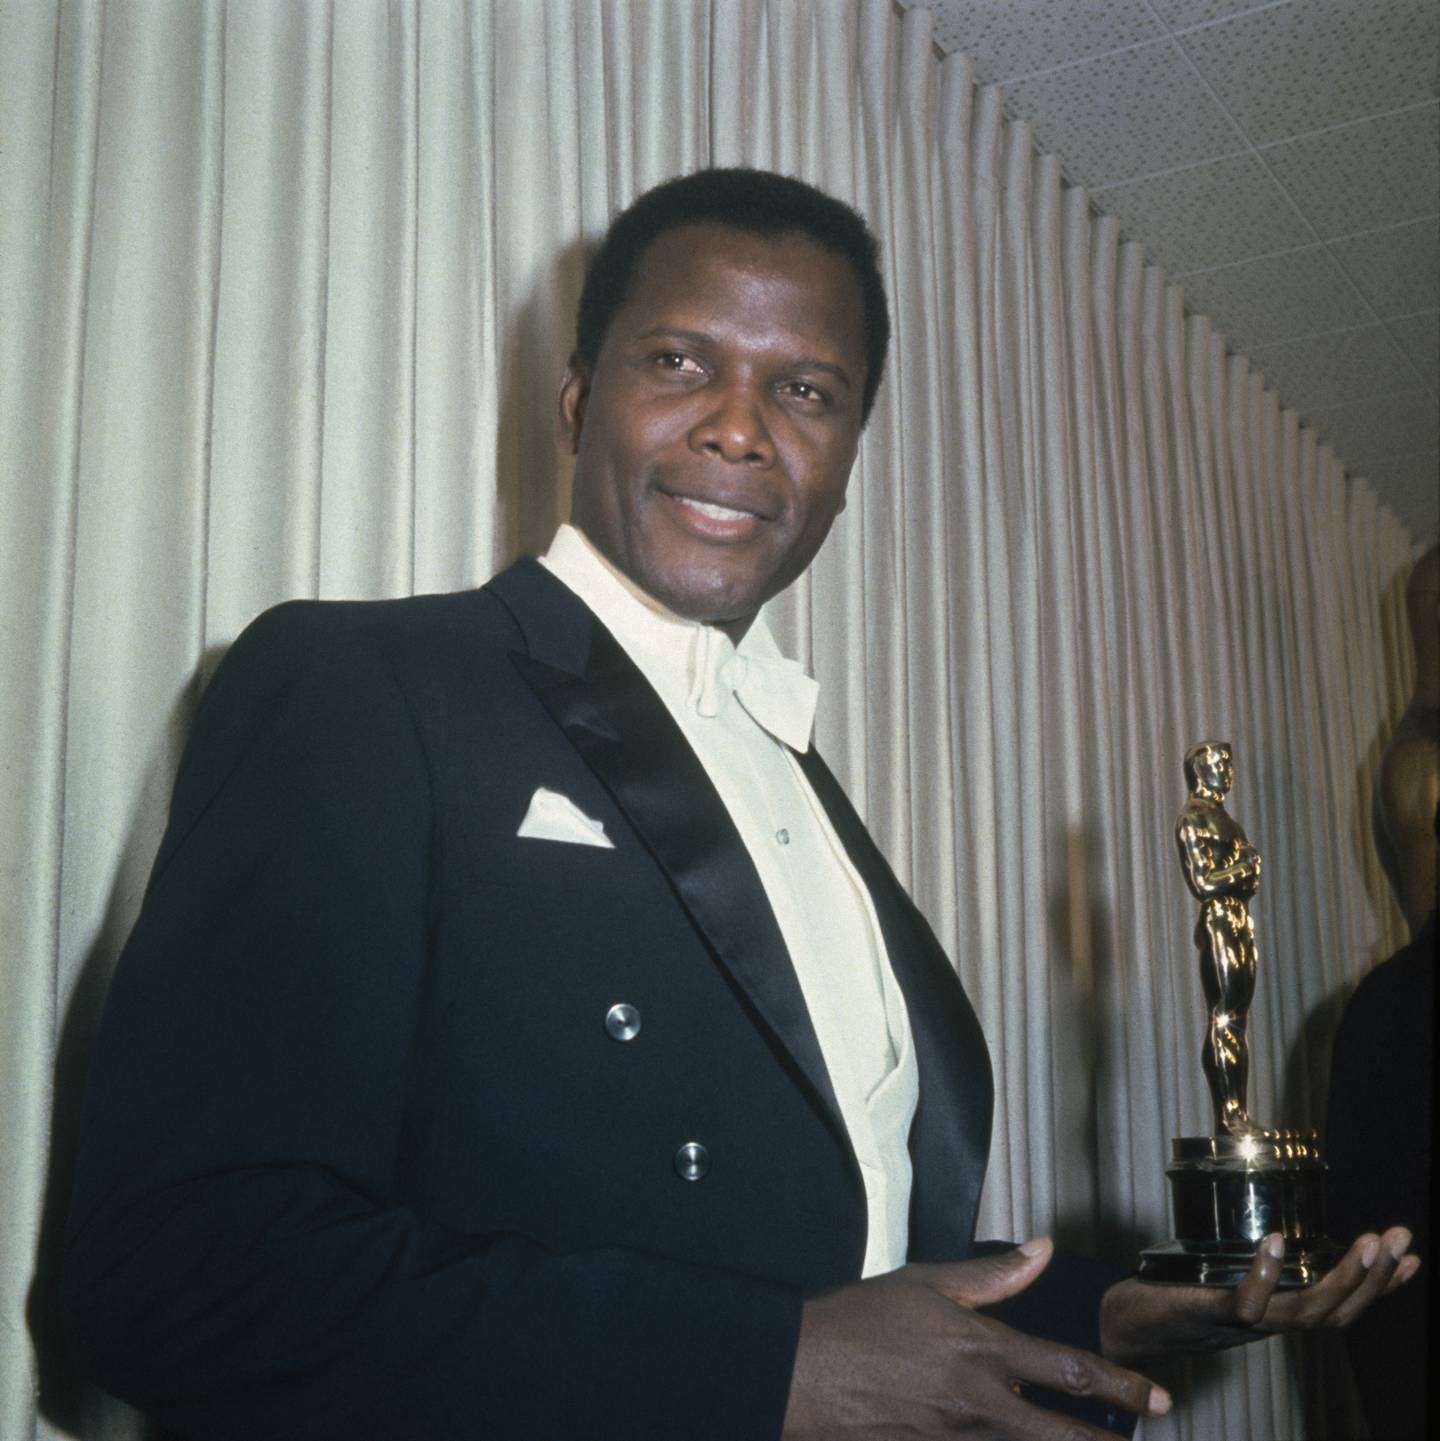 Actor Sidney Poitier holding his Academy Award for Best Actor in a Leading Role for 'Lilies Of The Field', directed by Ralph Nelson, at the 36th Academy Awards ceremony, April 13, 1964. Getty Images